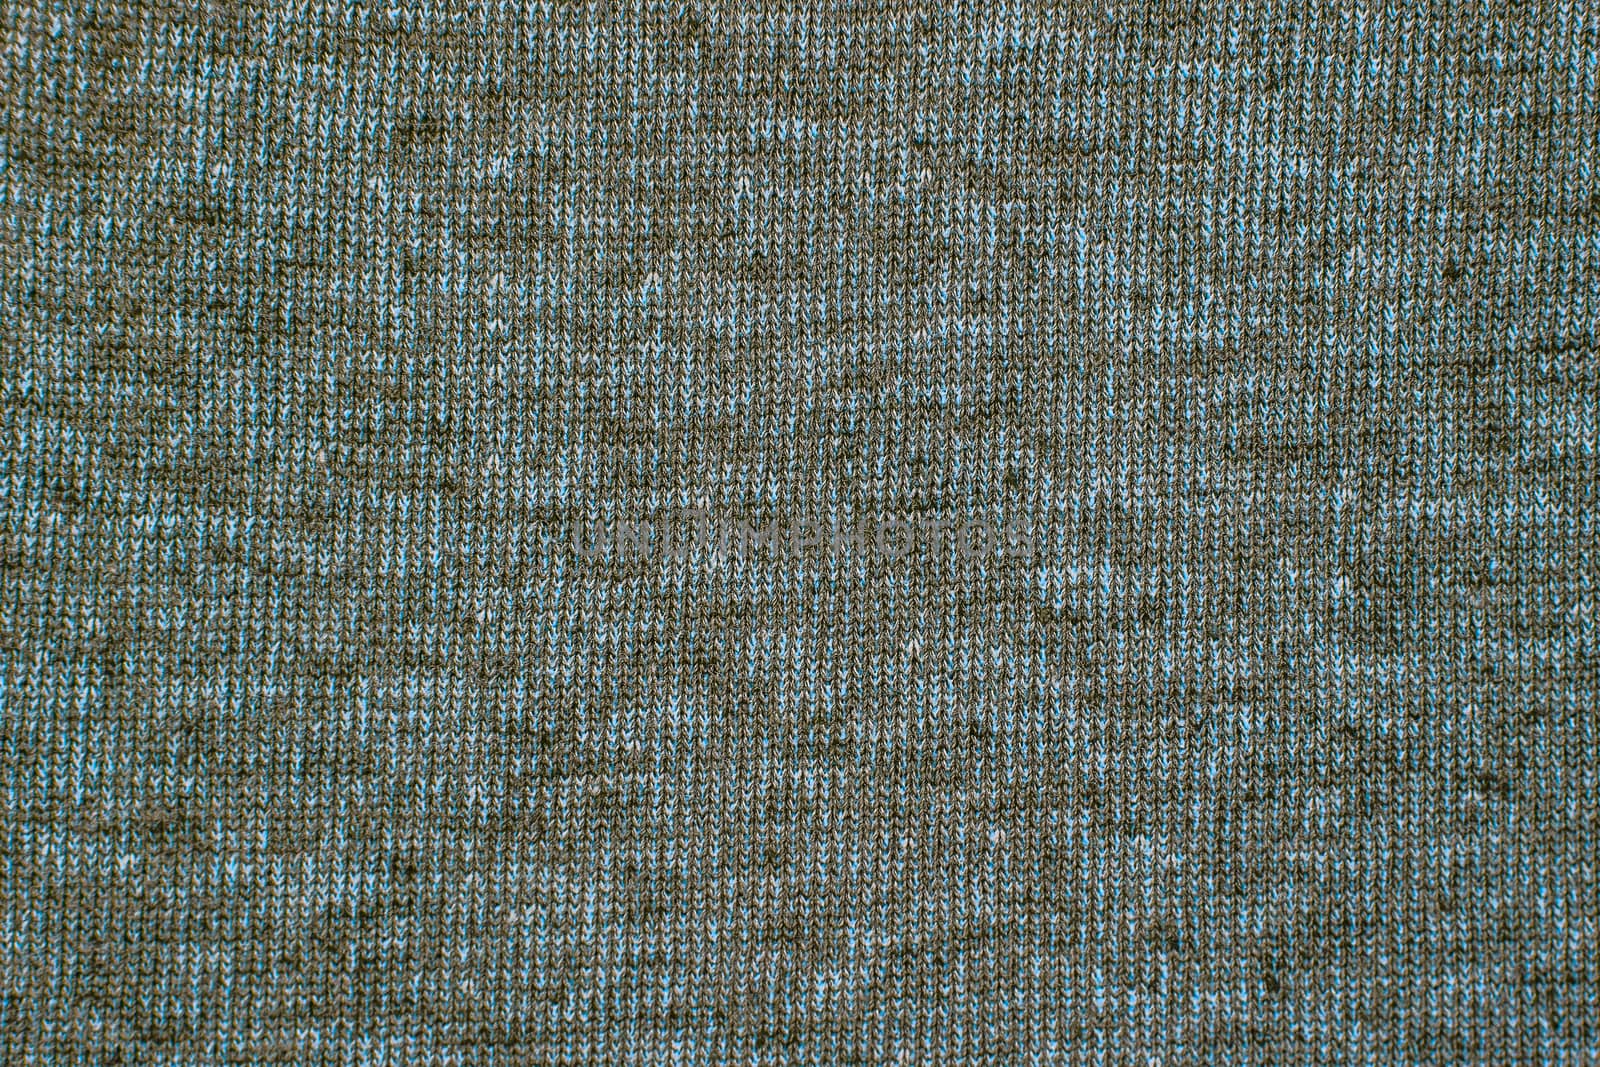 Knitwear texture background. Knitting, stockinet, tricot